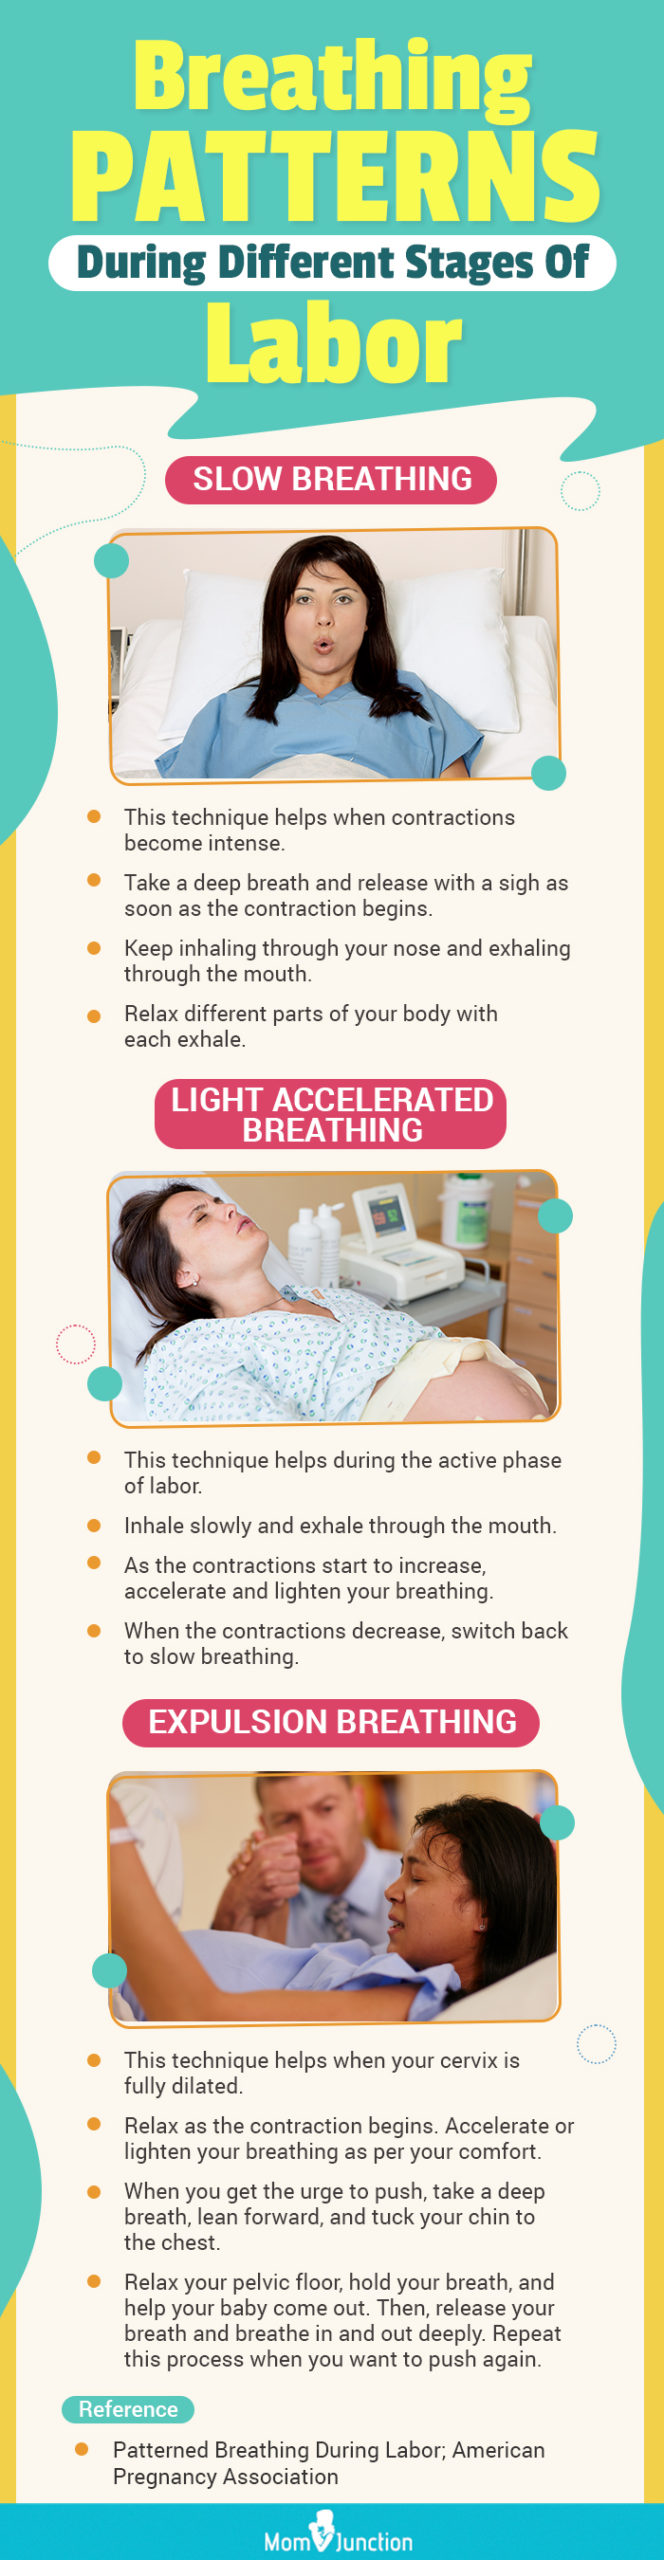 breathing patterns during different stages of labor (infographic)